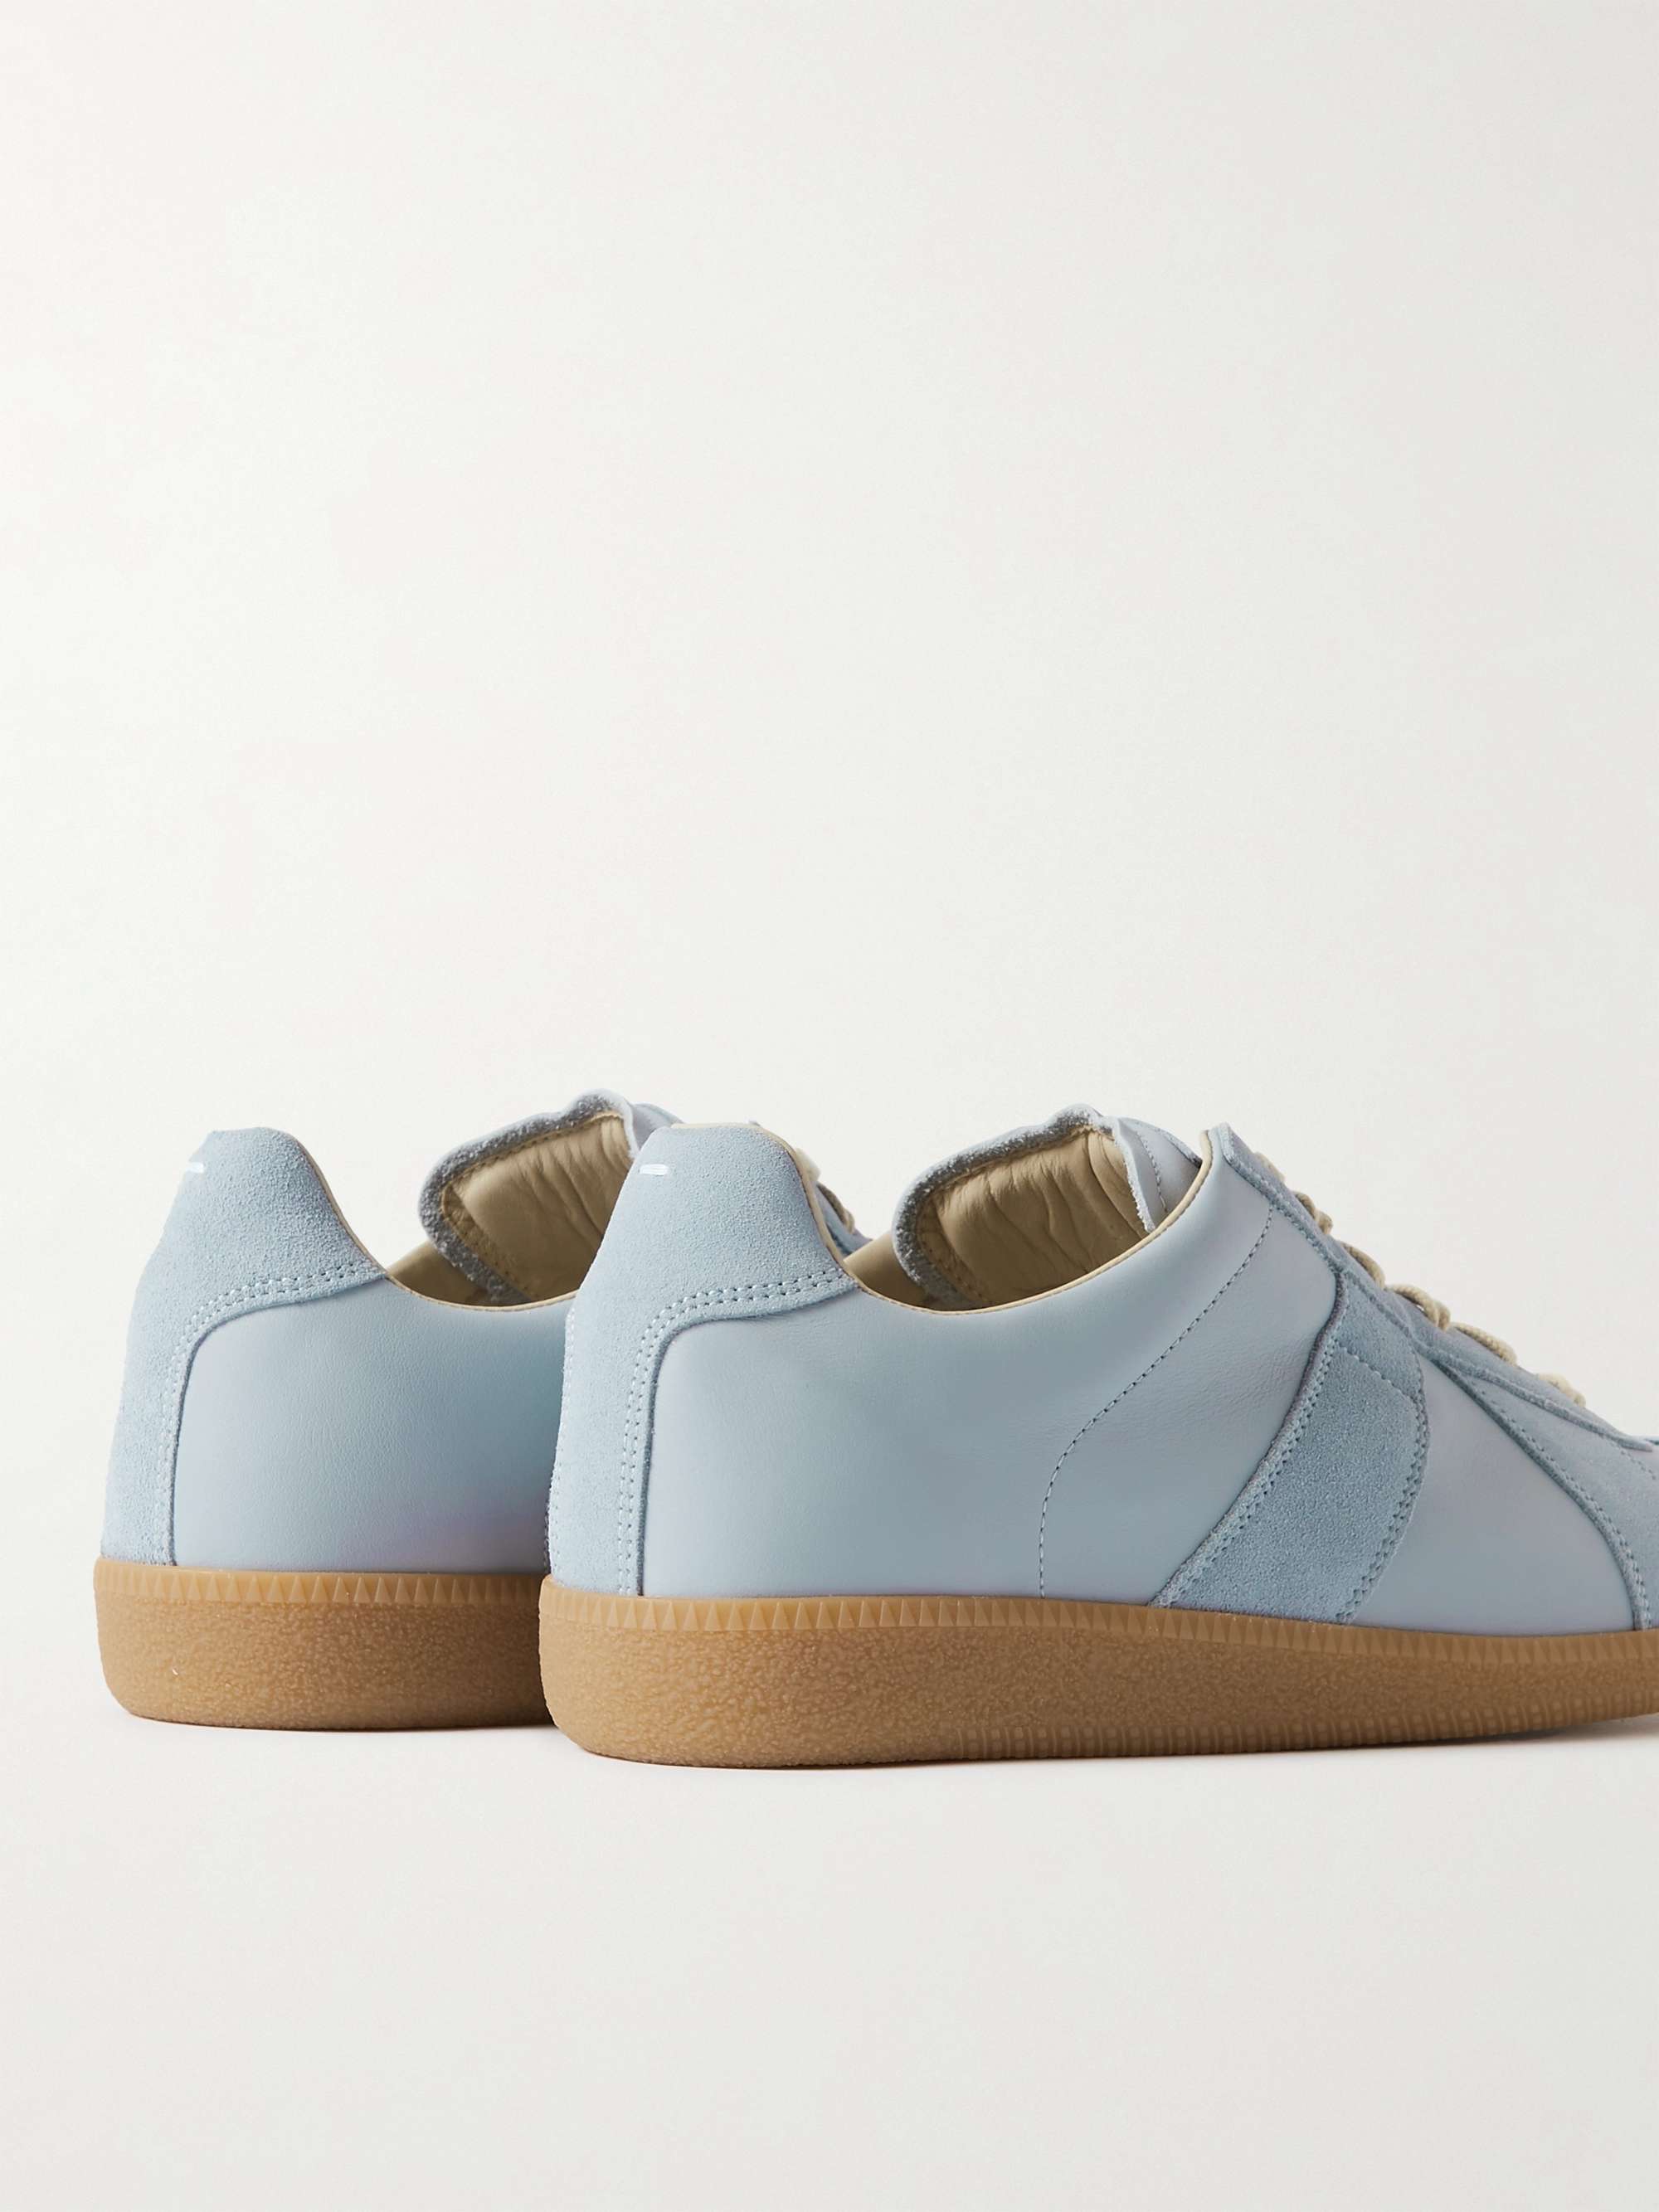 MAISON MARGIELA Replica Leather and Suede Sneakers